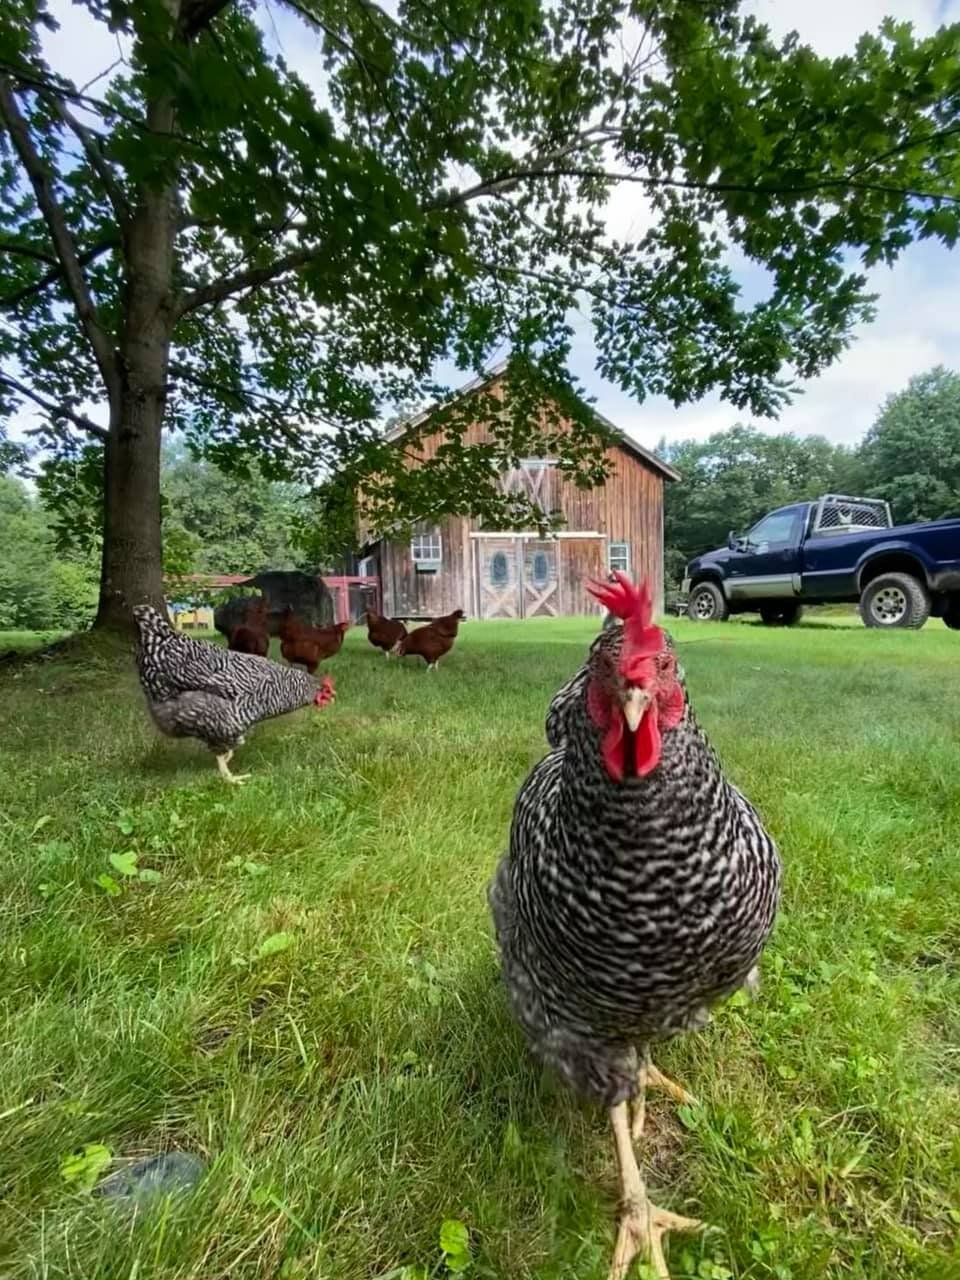  Welcoming committee: two Barred Rocks and five Rhode Island Reds. 